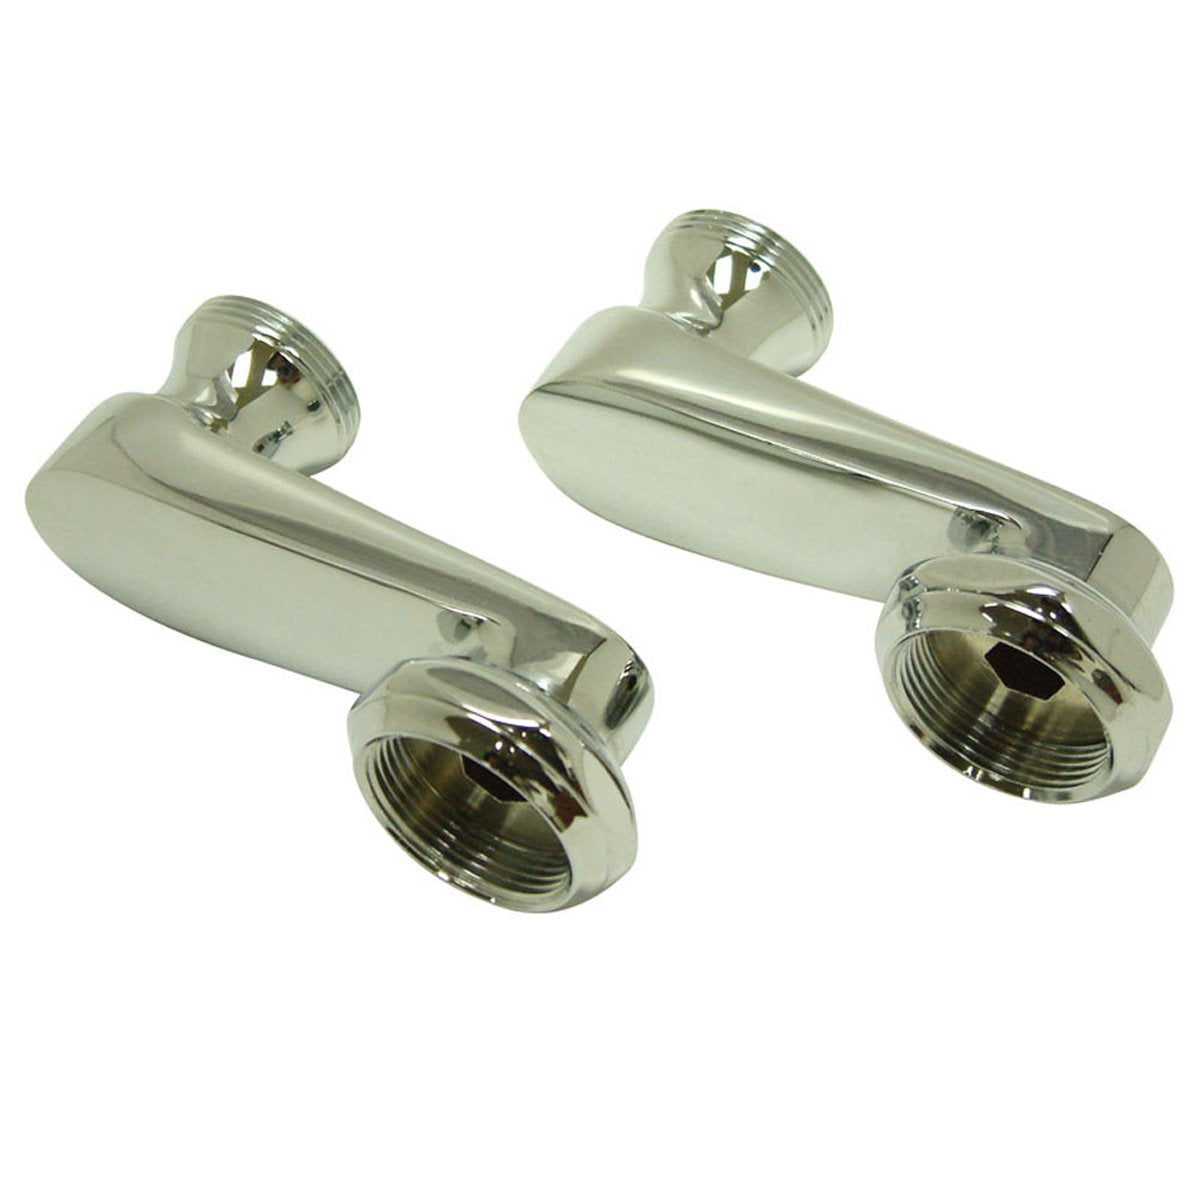 Kingston Brass Vintage Modified Swing Arms-Bathroom Accessories-Free Shipping-Directsinks.